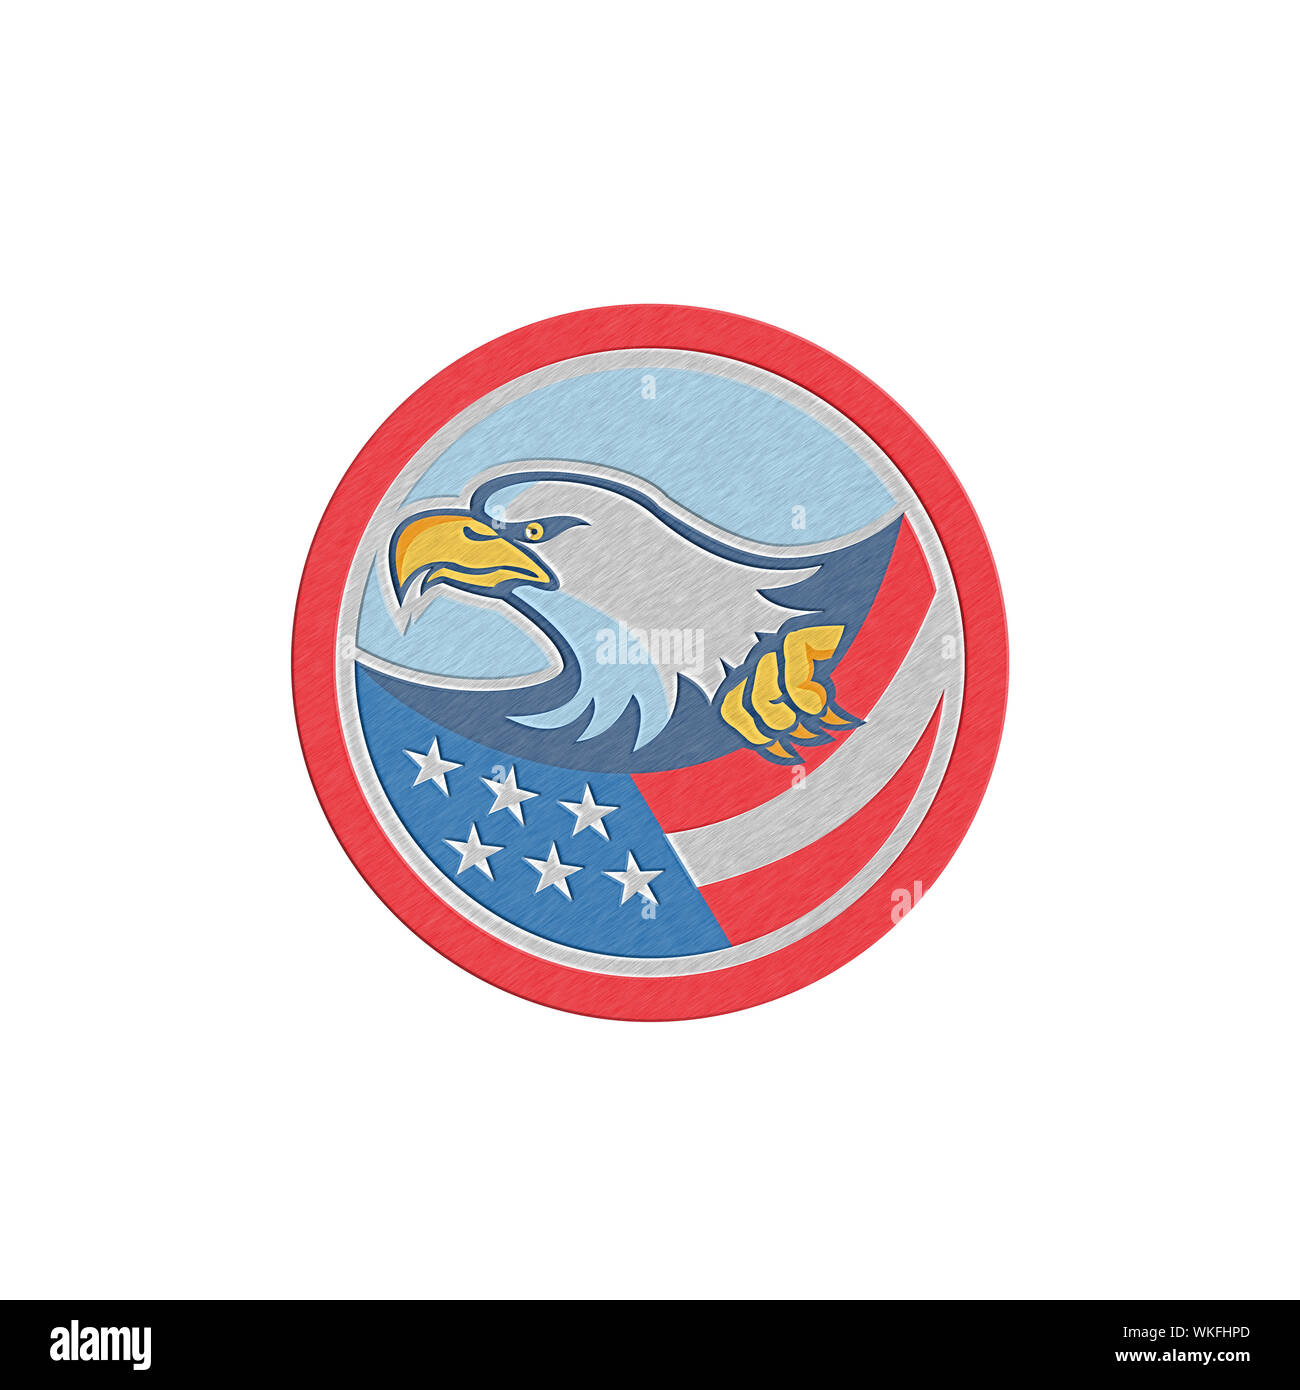 Metallic styled illustration of a bald eagle clutching an american stars and stripes flag set inside circle on isolated background done in retro style Stock Photo